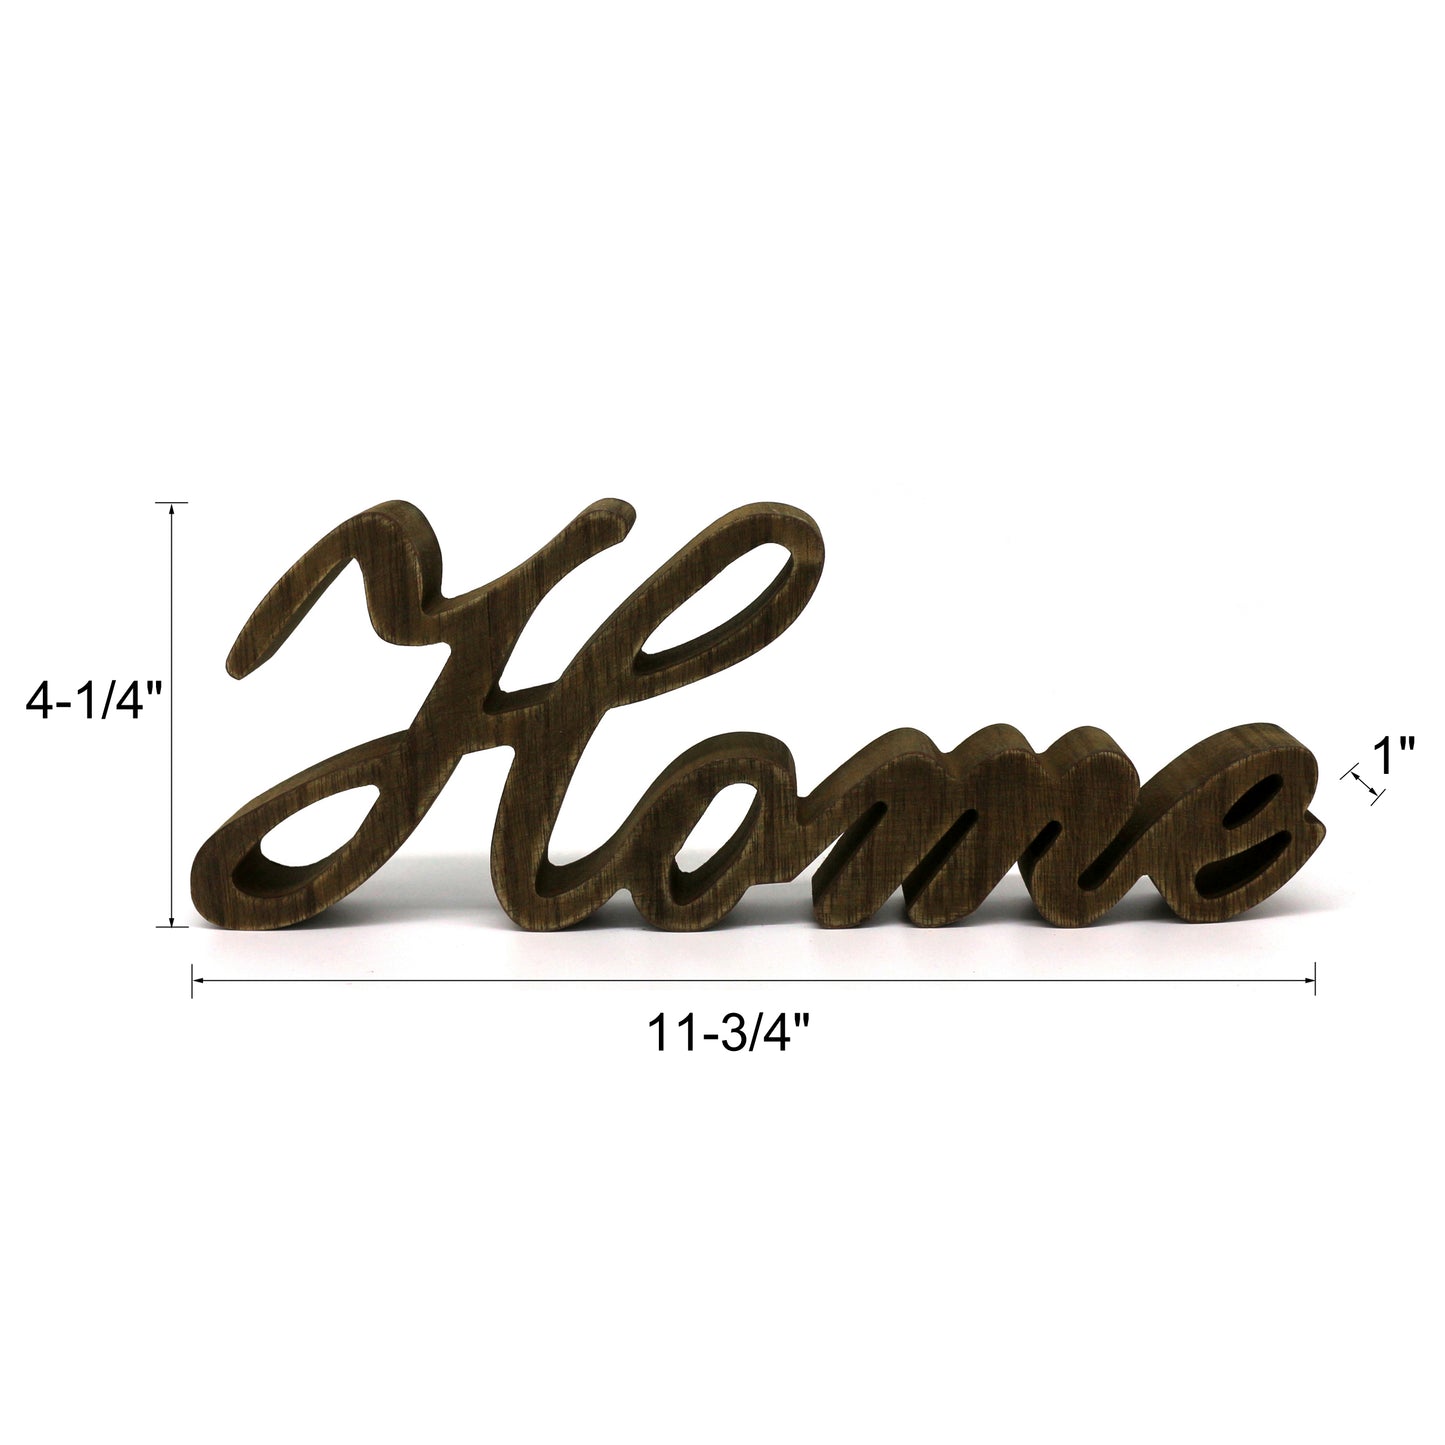 CVHOMEDECO. Rustic Vintage Distressed Wooden Words Sign Free Standing "Home" Tabletop/Shelf/Home Wall/Office Decoration Art, 11.75 x 4.25 x 1 Inch